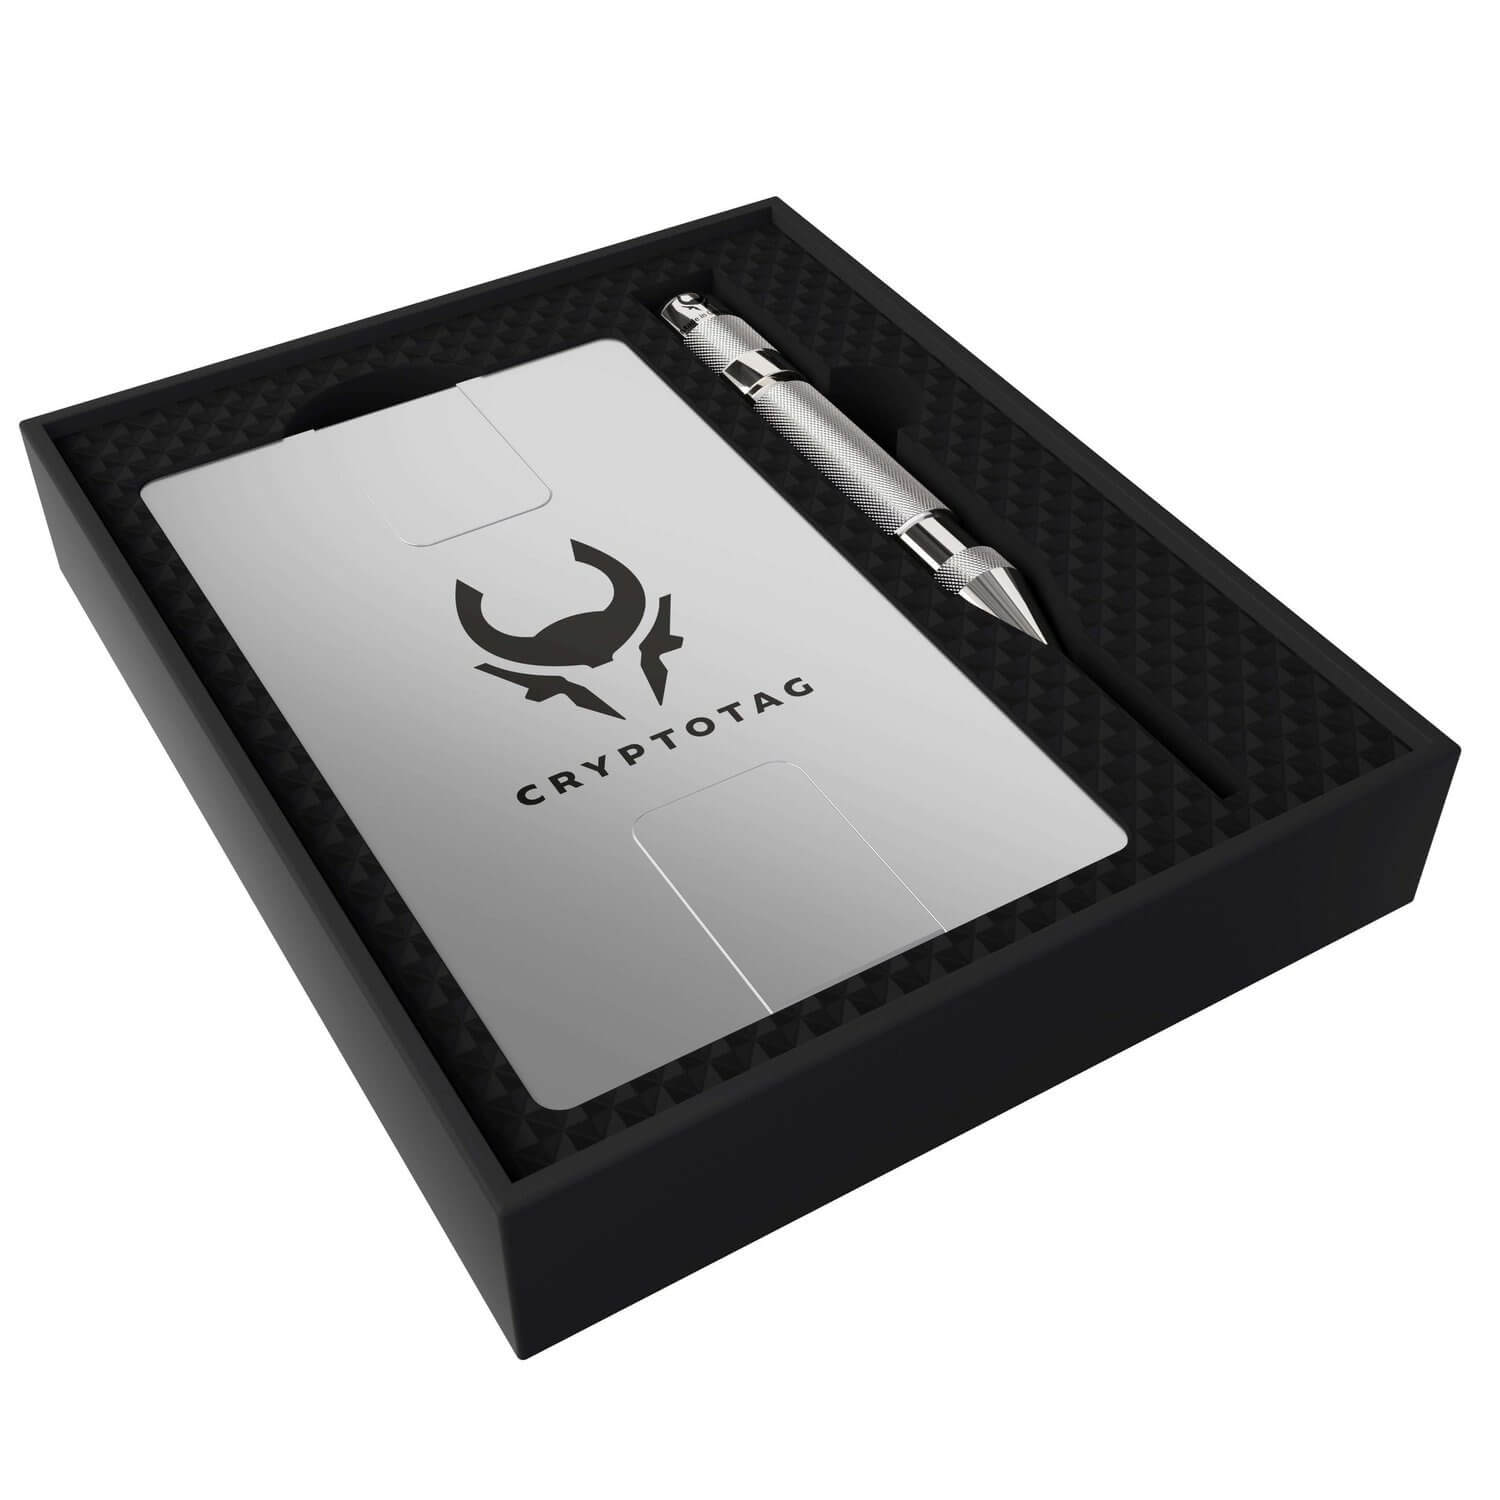 CryptoTag Zeus titanium seed phrase storage device neatly placed inside its original packaging box.